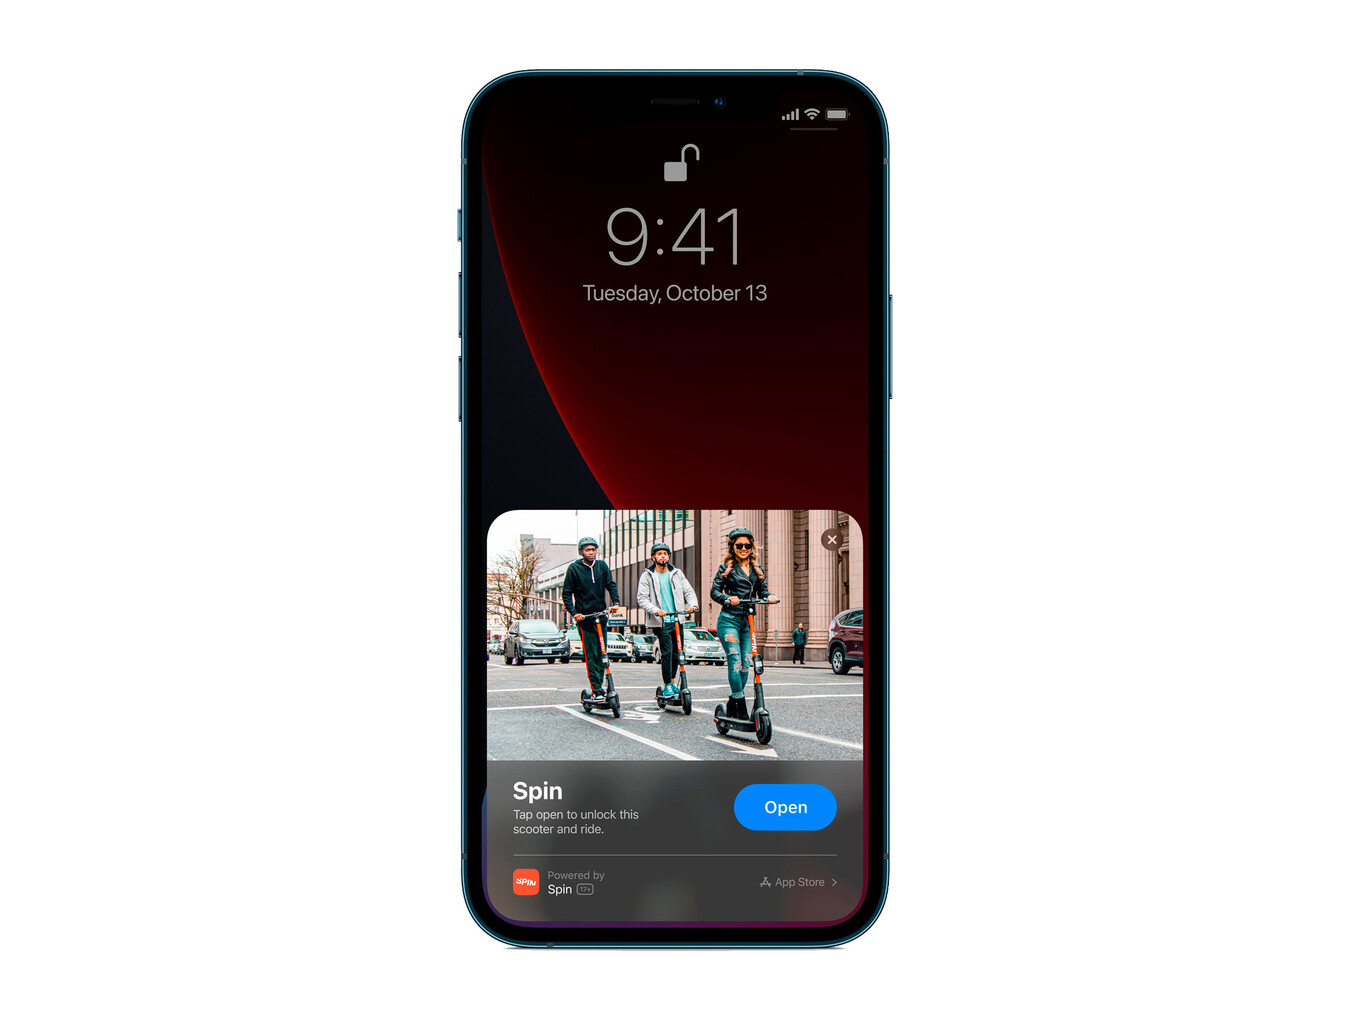 The same notch and the same refresh rate